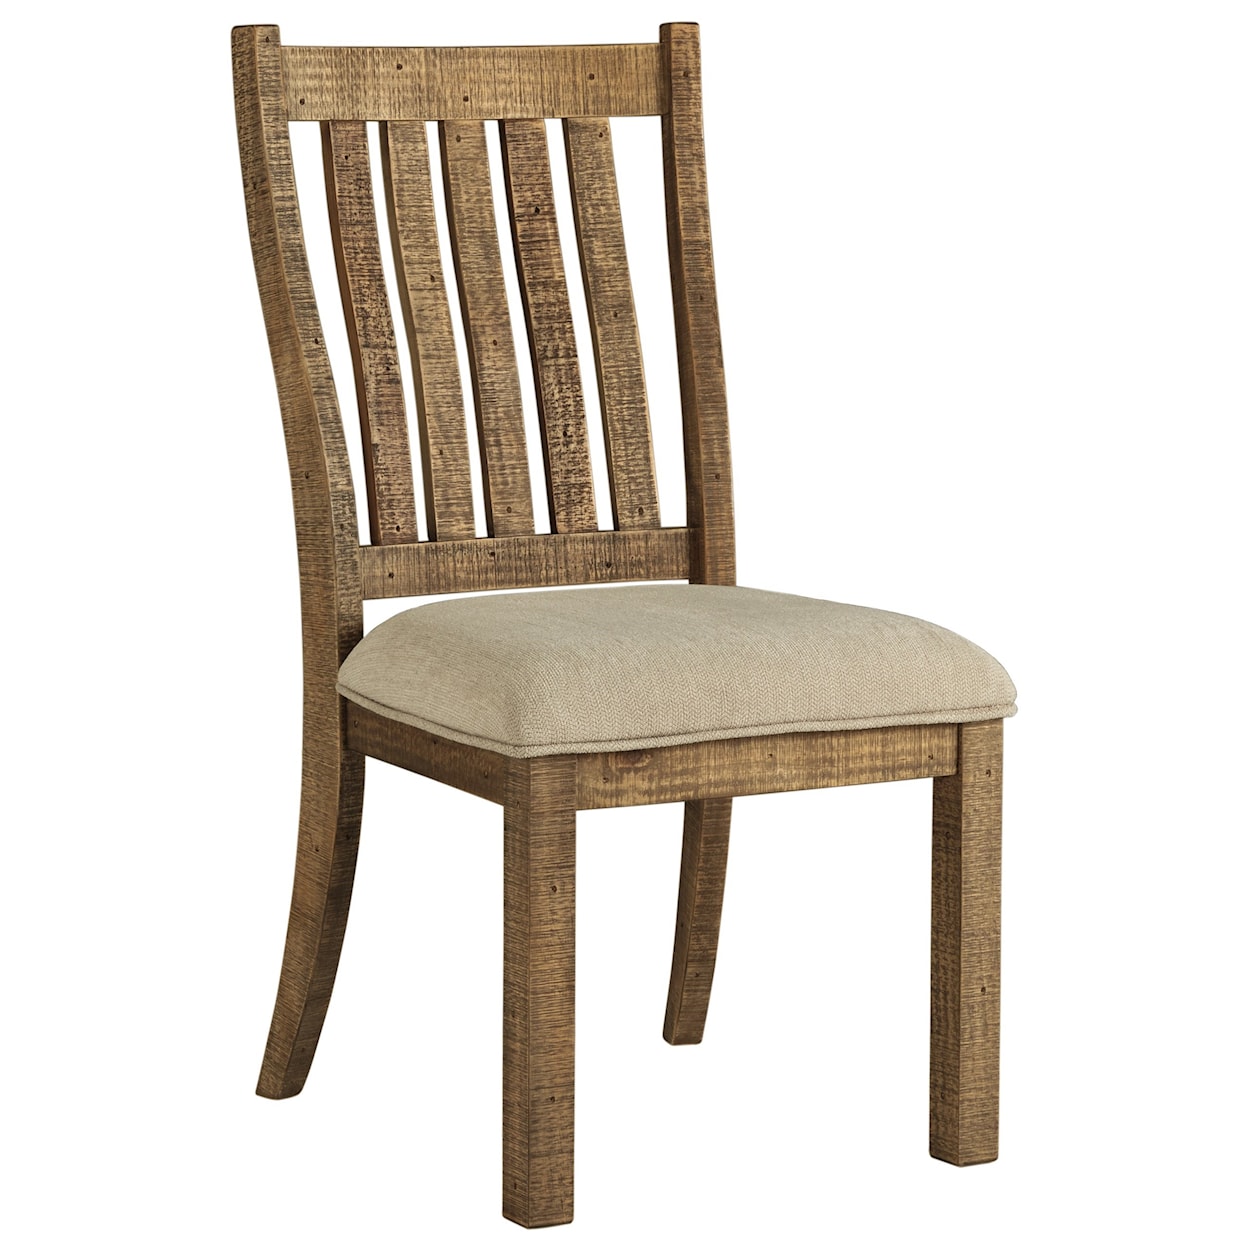 Signature Design by Ashley Furniture Grindleburg Dining Upholstered Side Chair